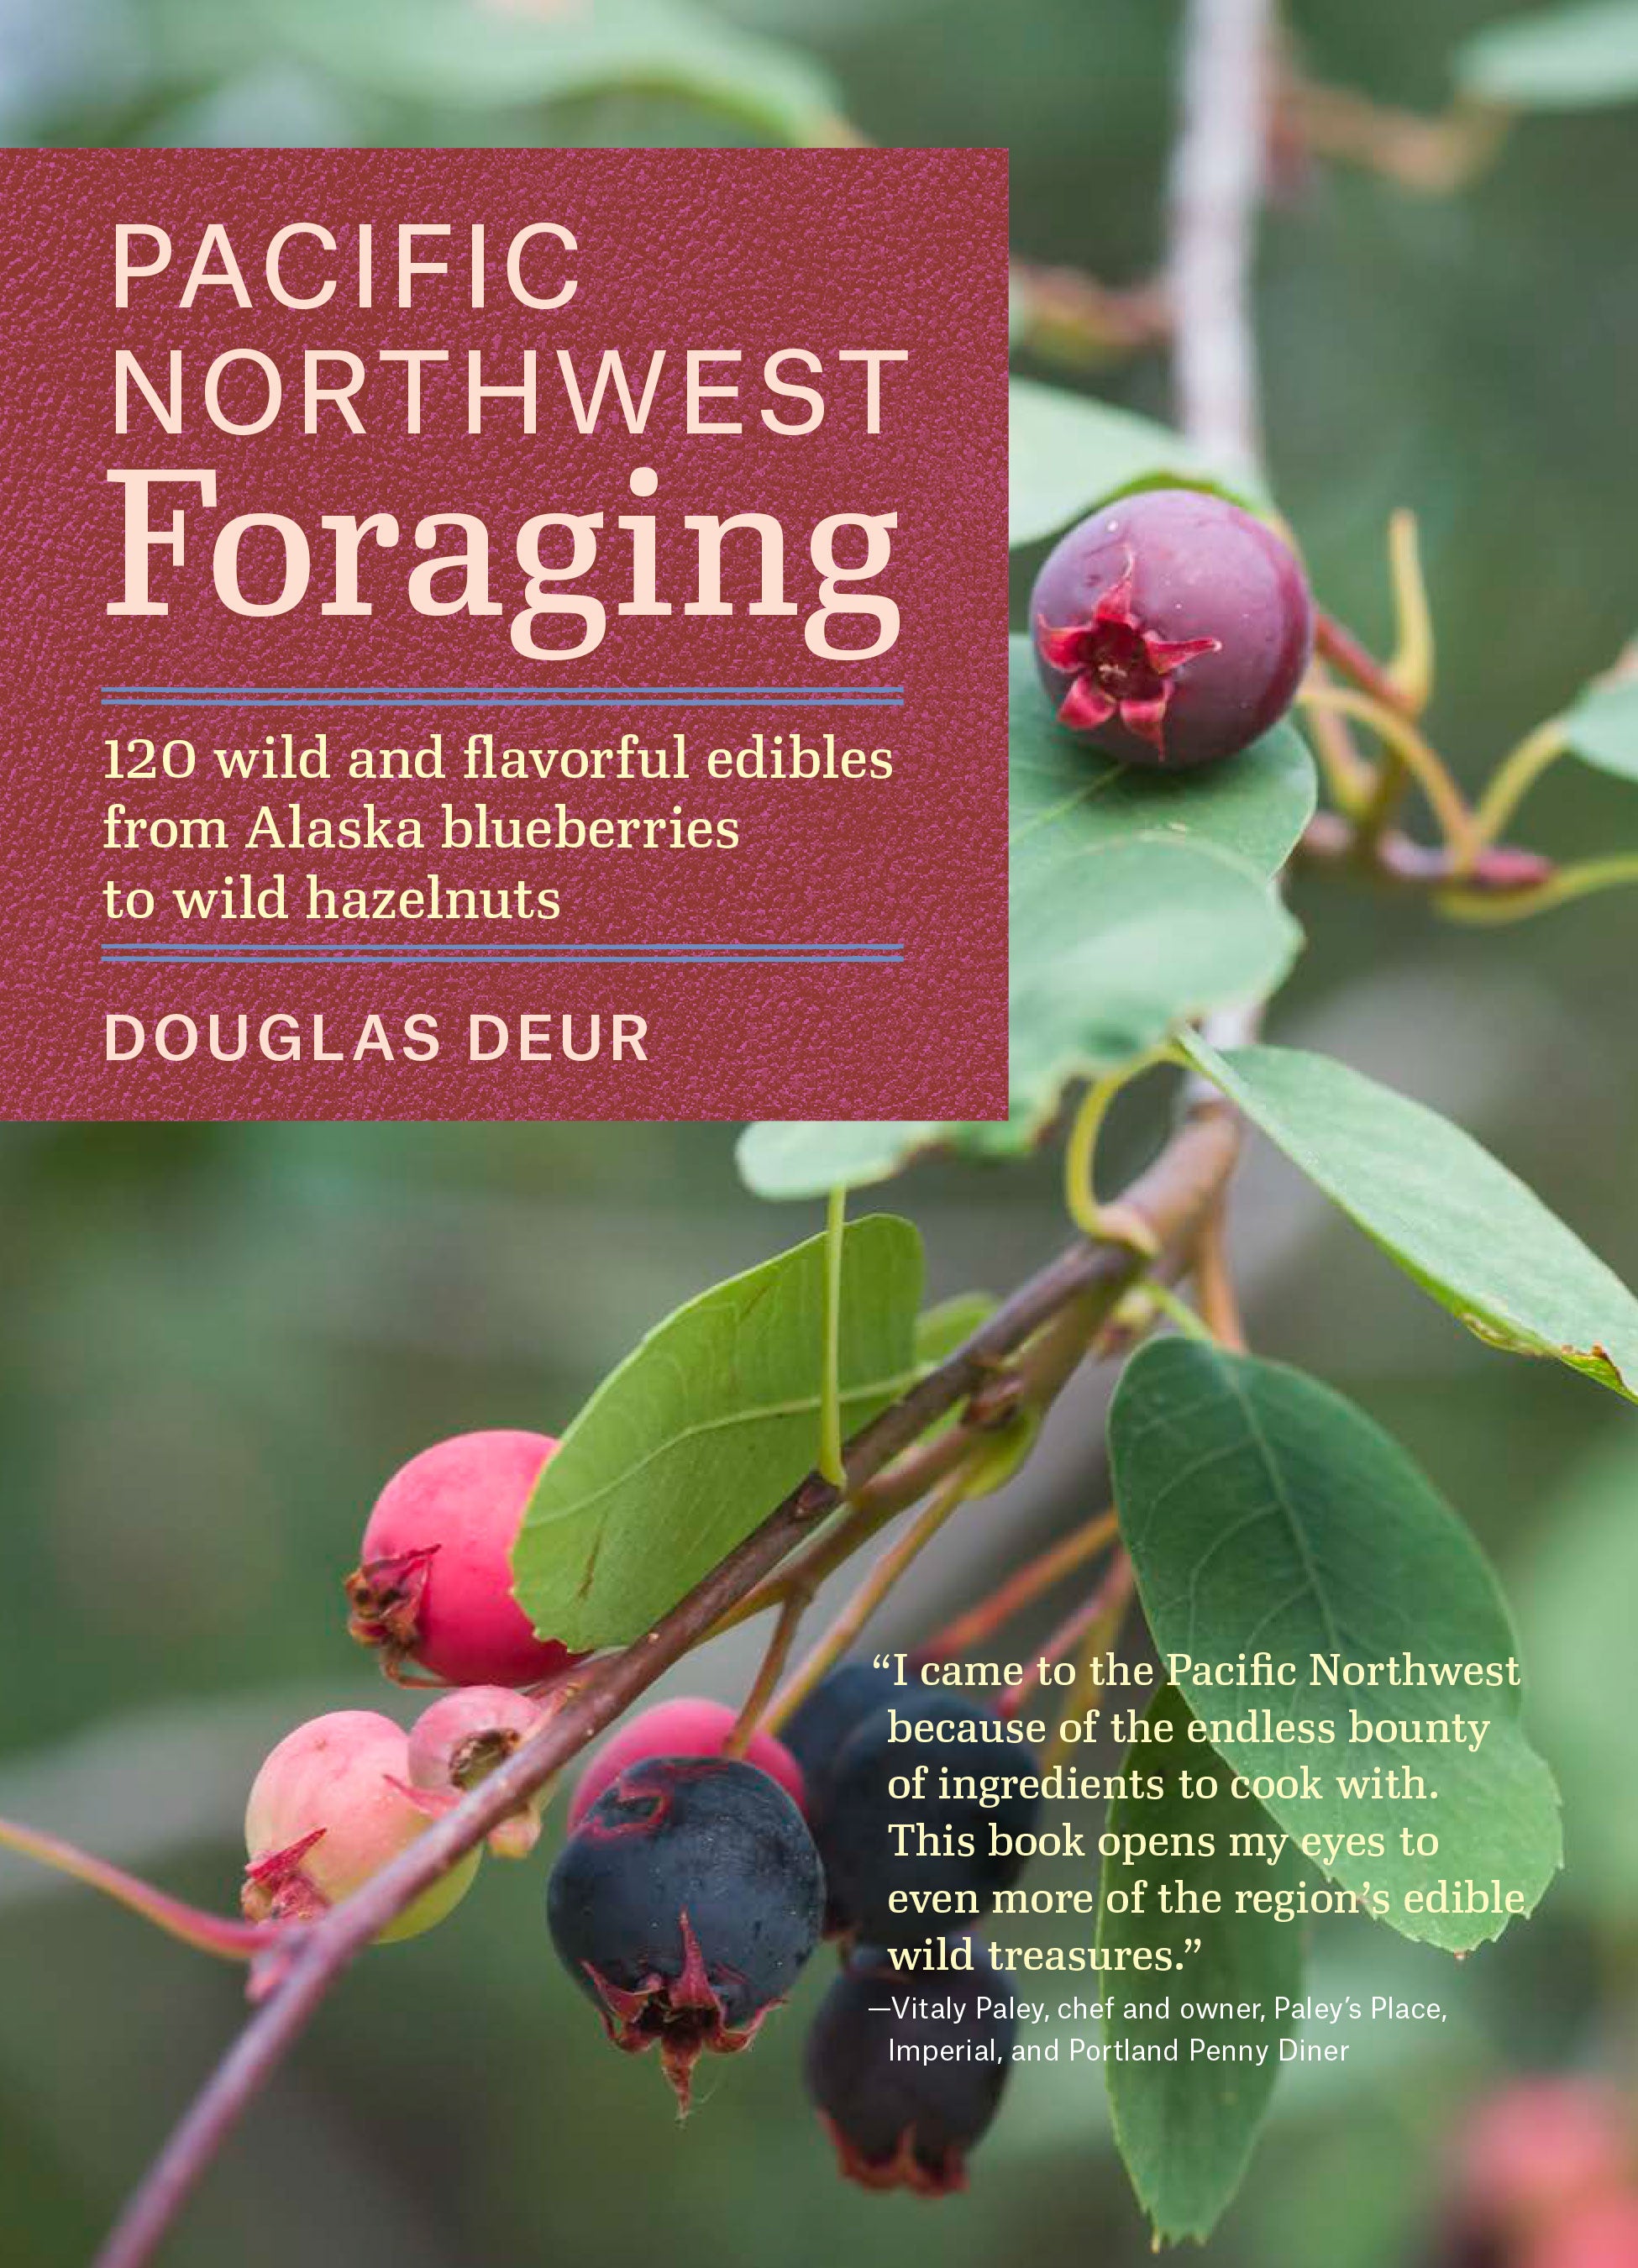 A cover featuring a photograph of a plant with rounded green leaves, a reddish stem, and red and blue berries.